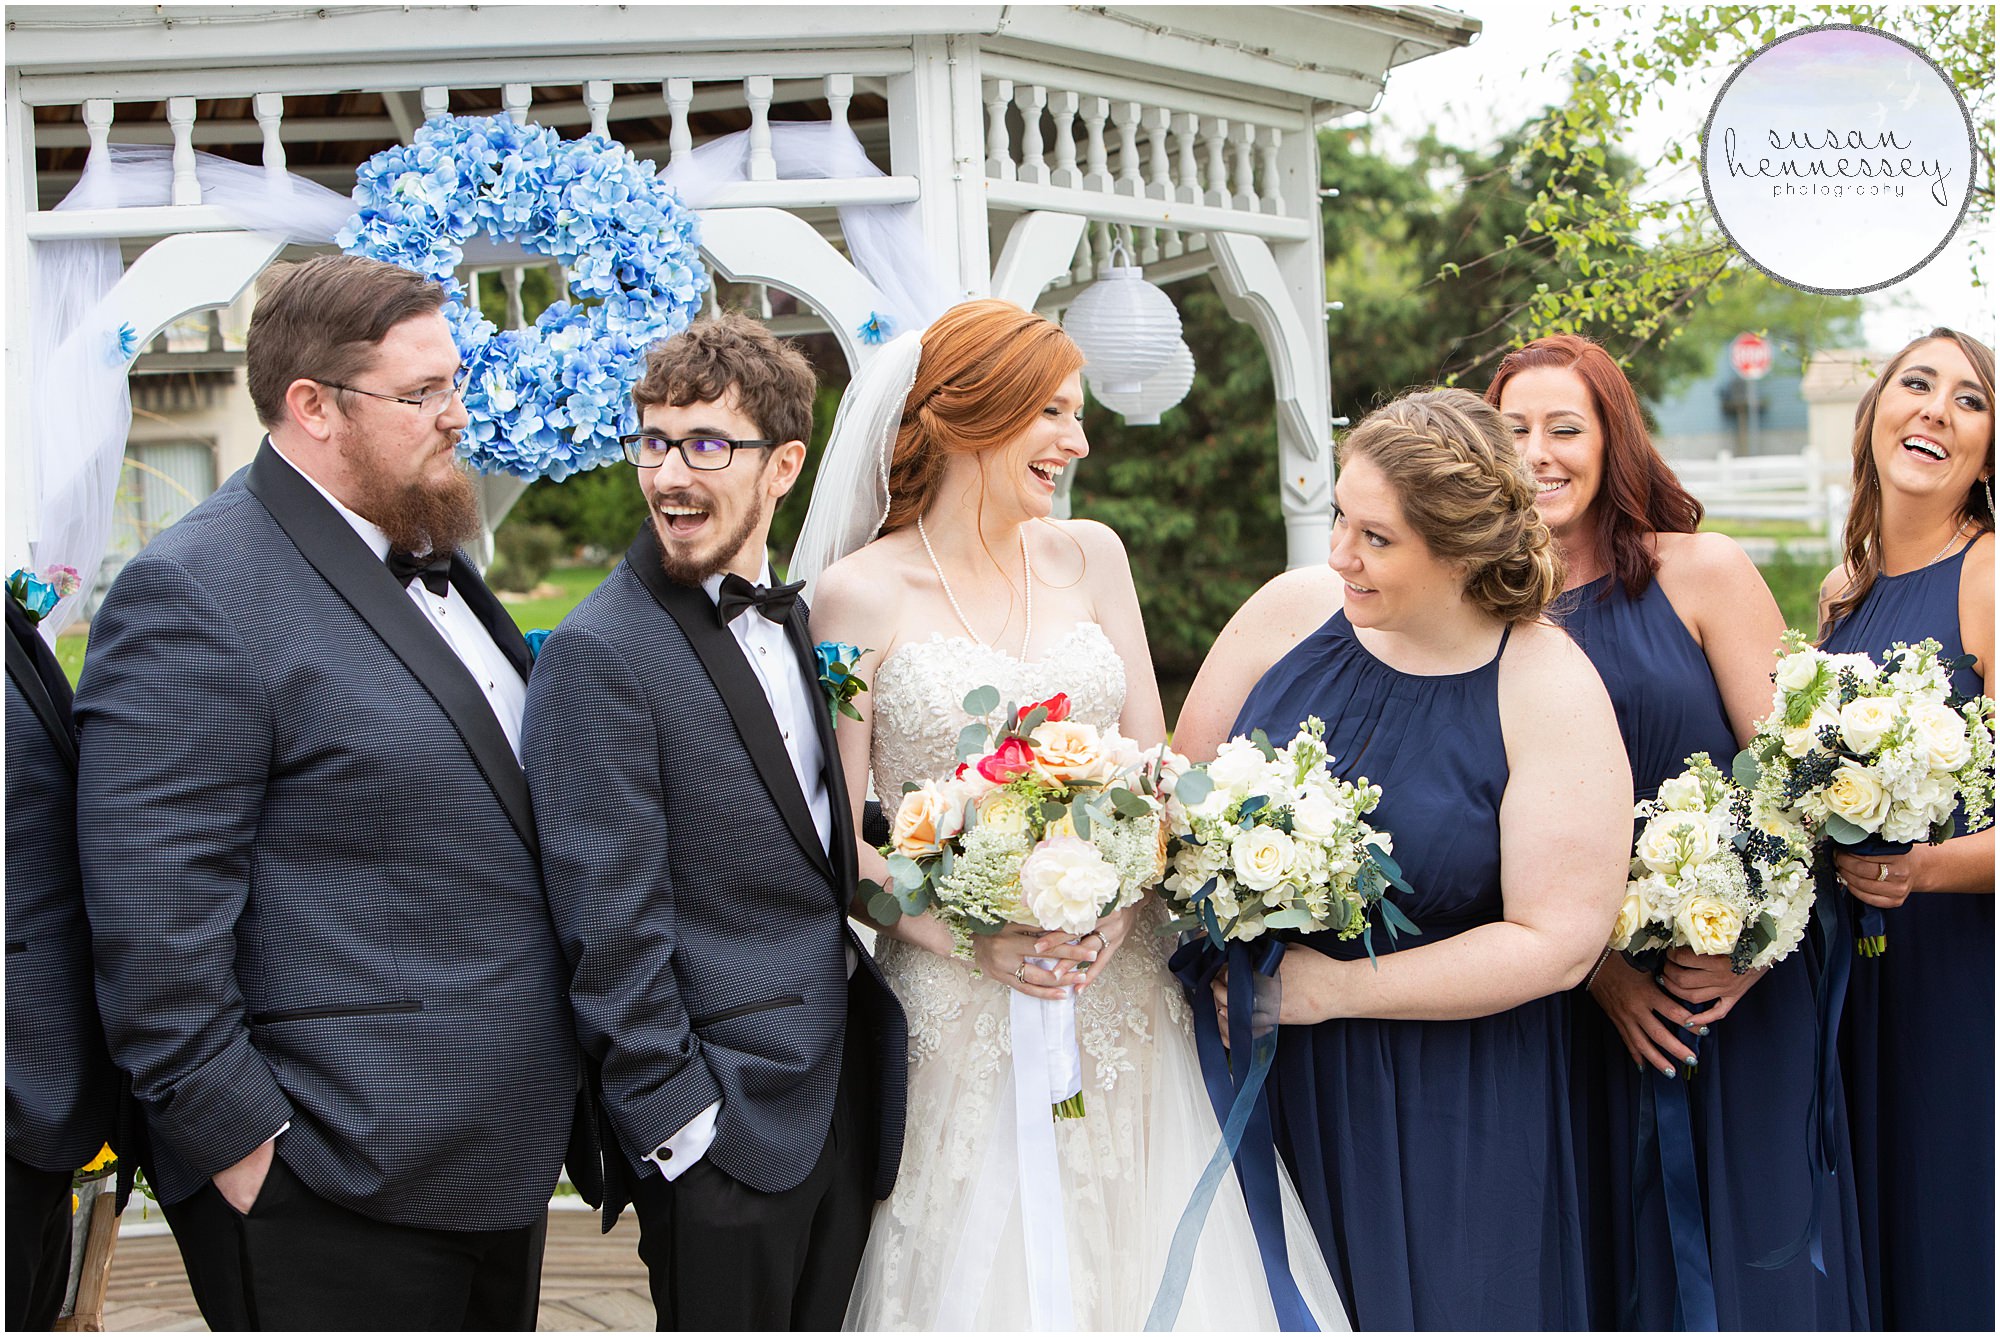 A bride and groom laugh with their bridal party.